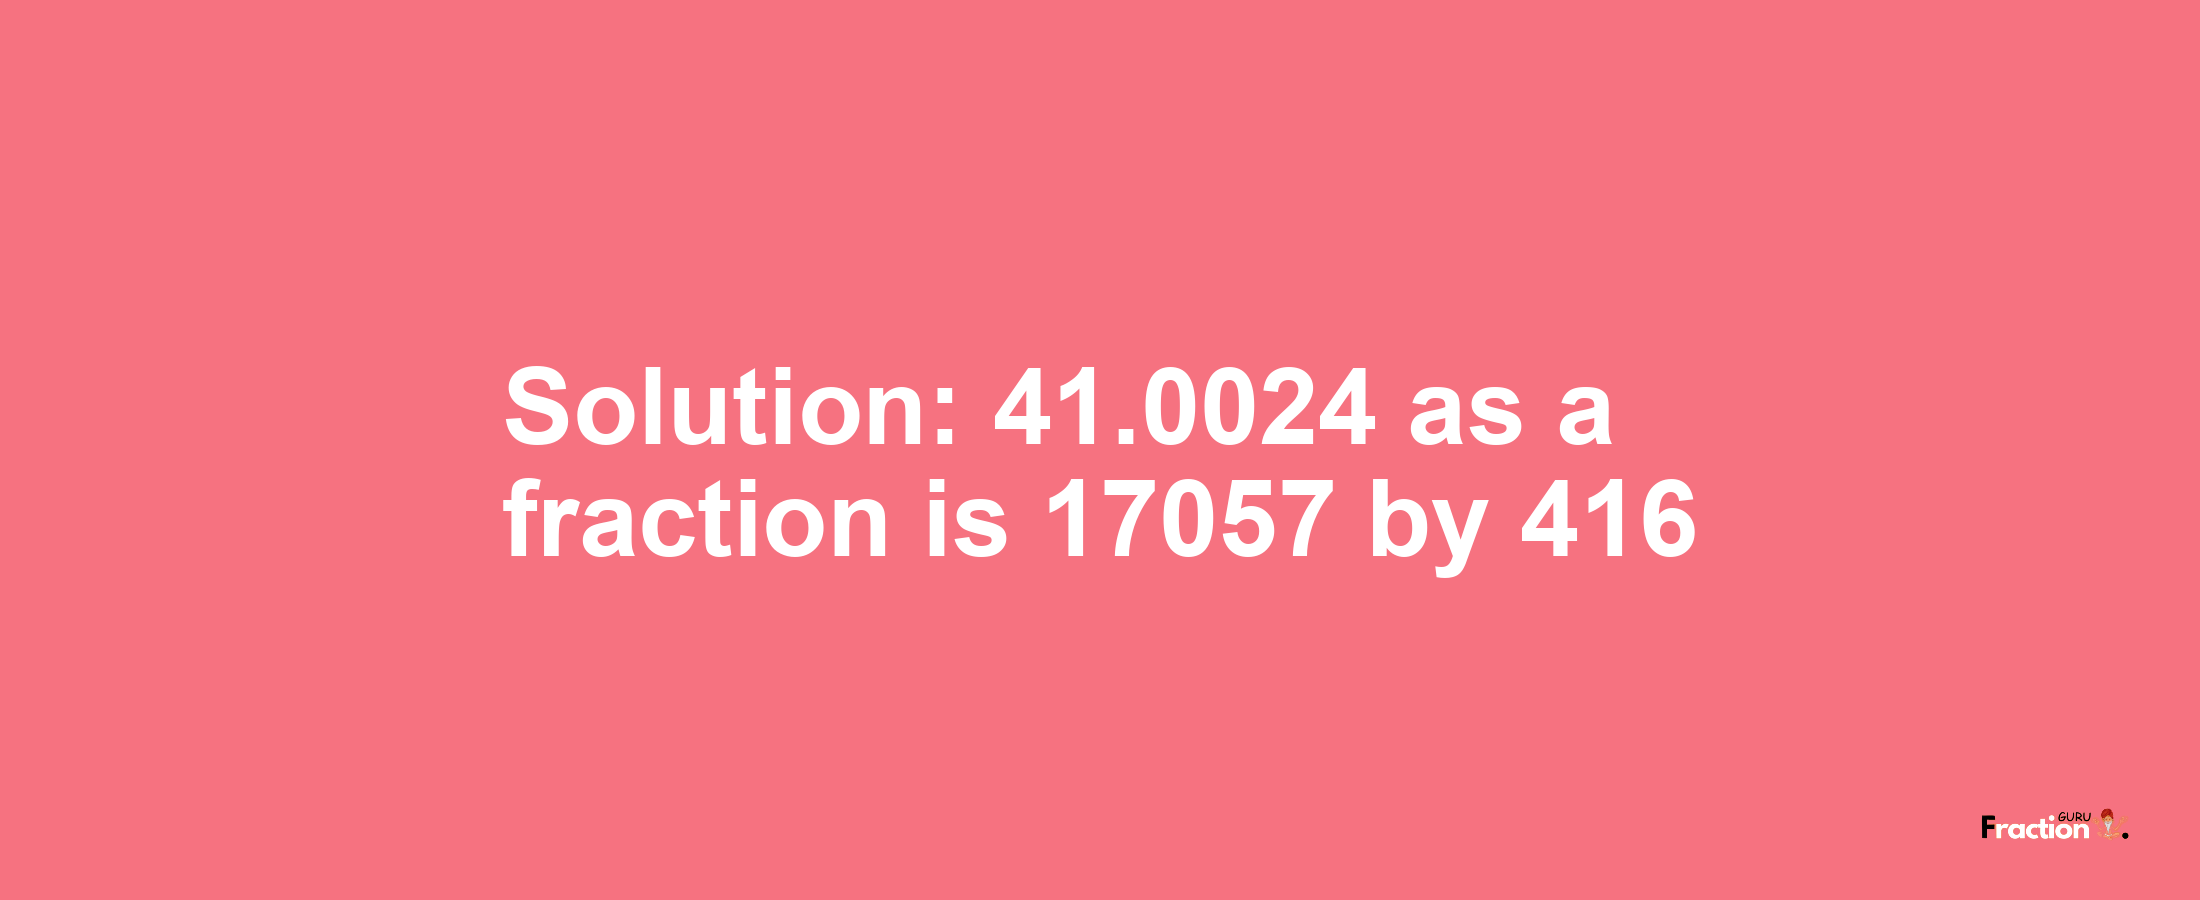 Solution:41.0024 as a fraction is 17057/416